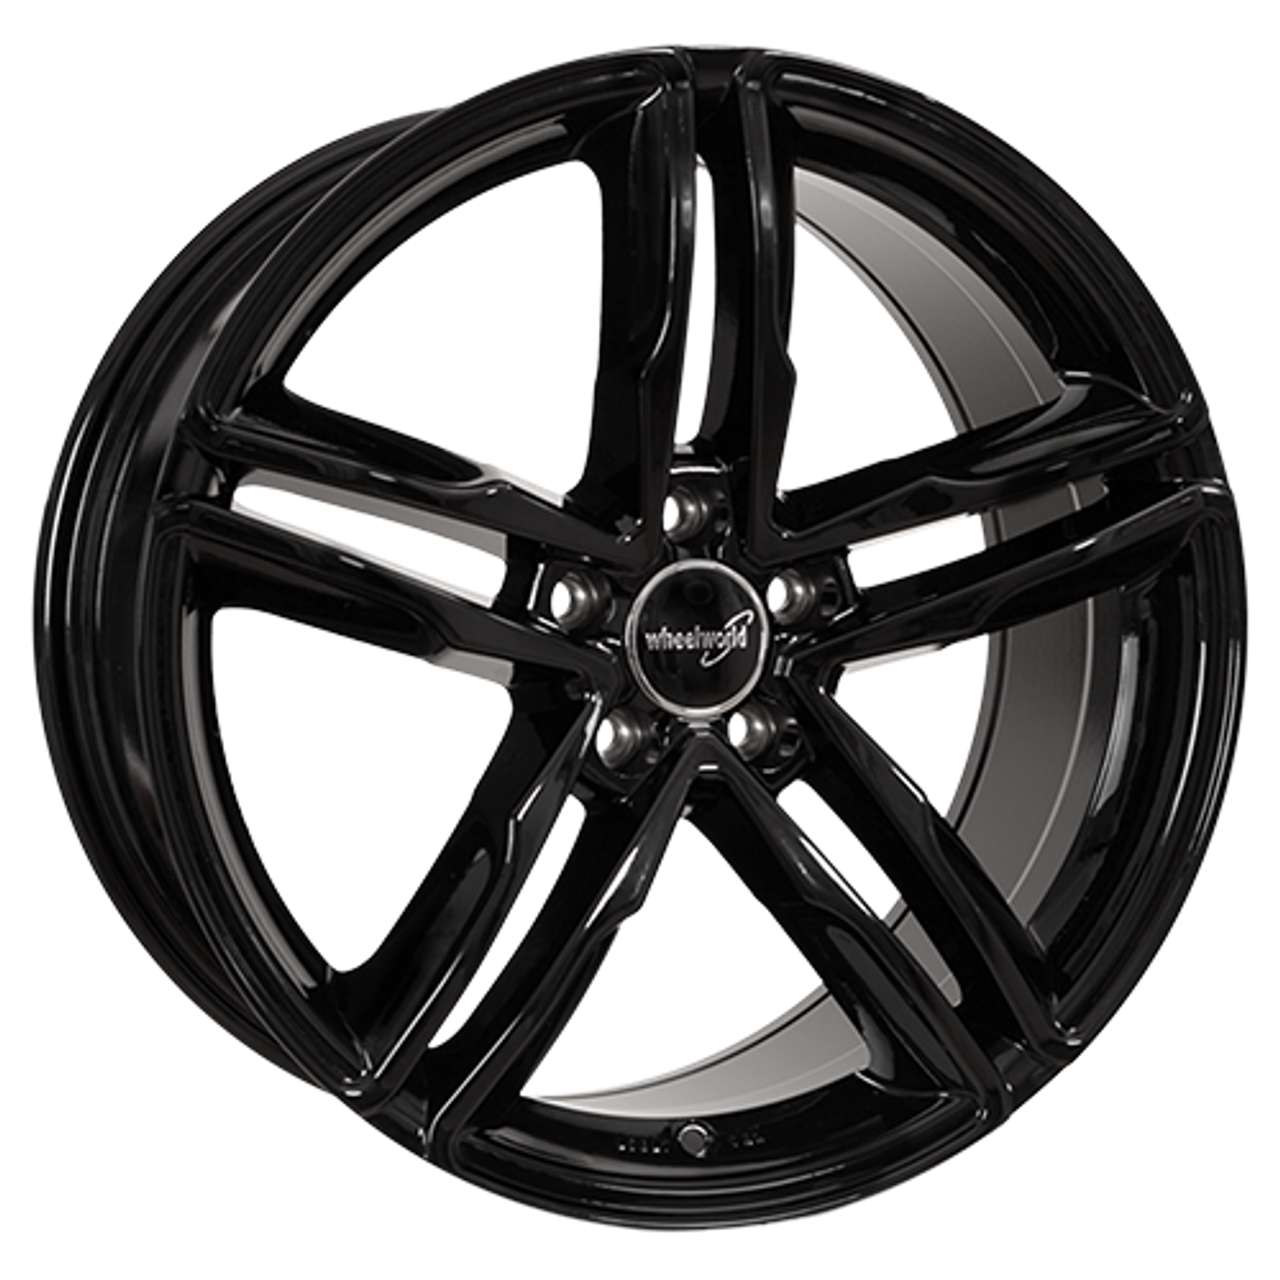 WHEELWORLD-2DRV WH11 black glossy painted 9.0Jx20 5x112 ET40